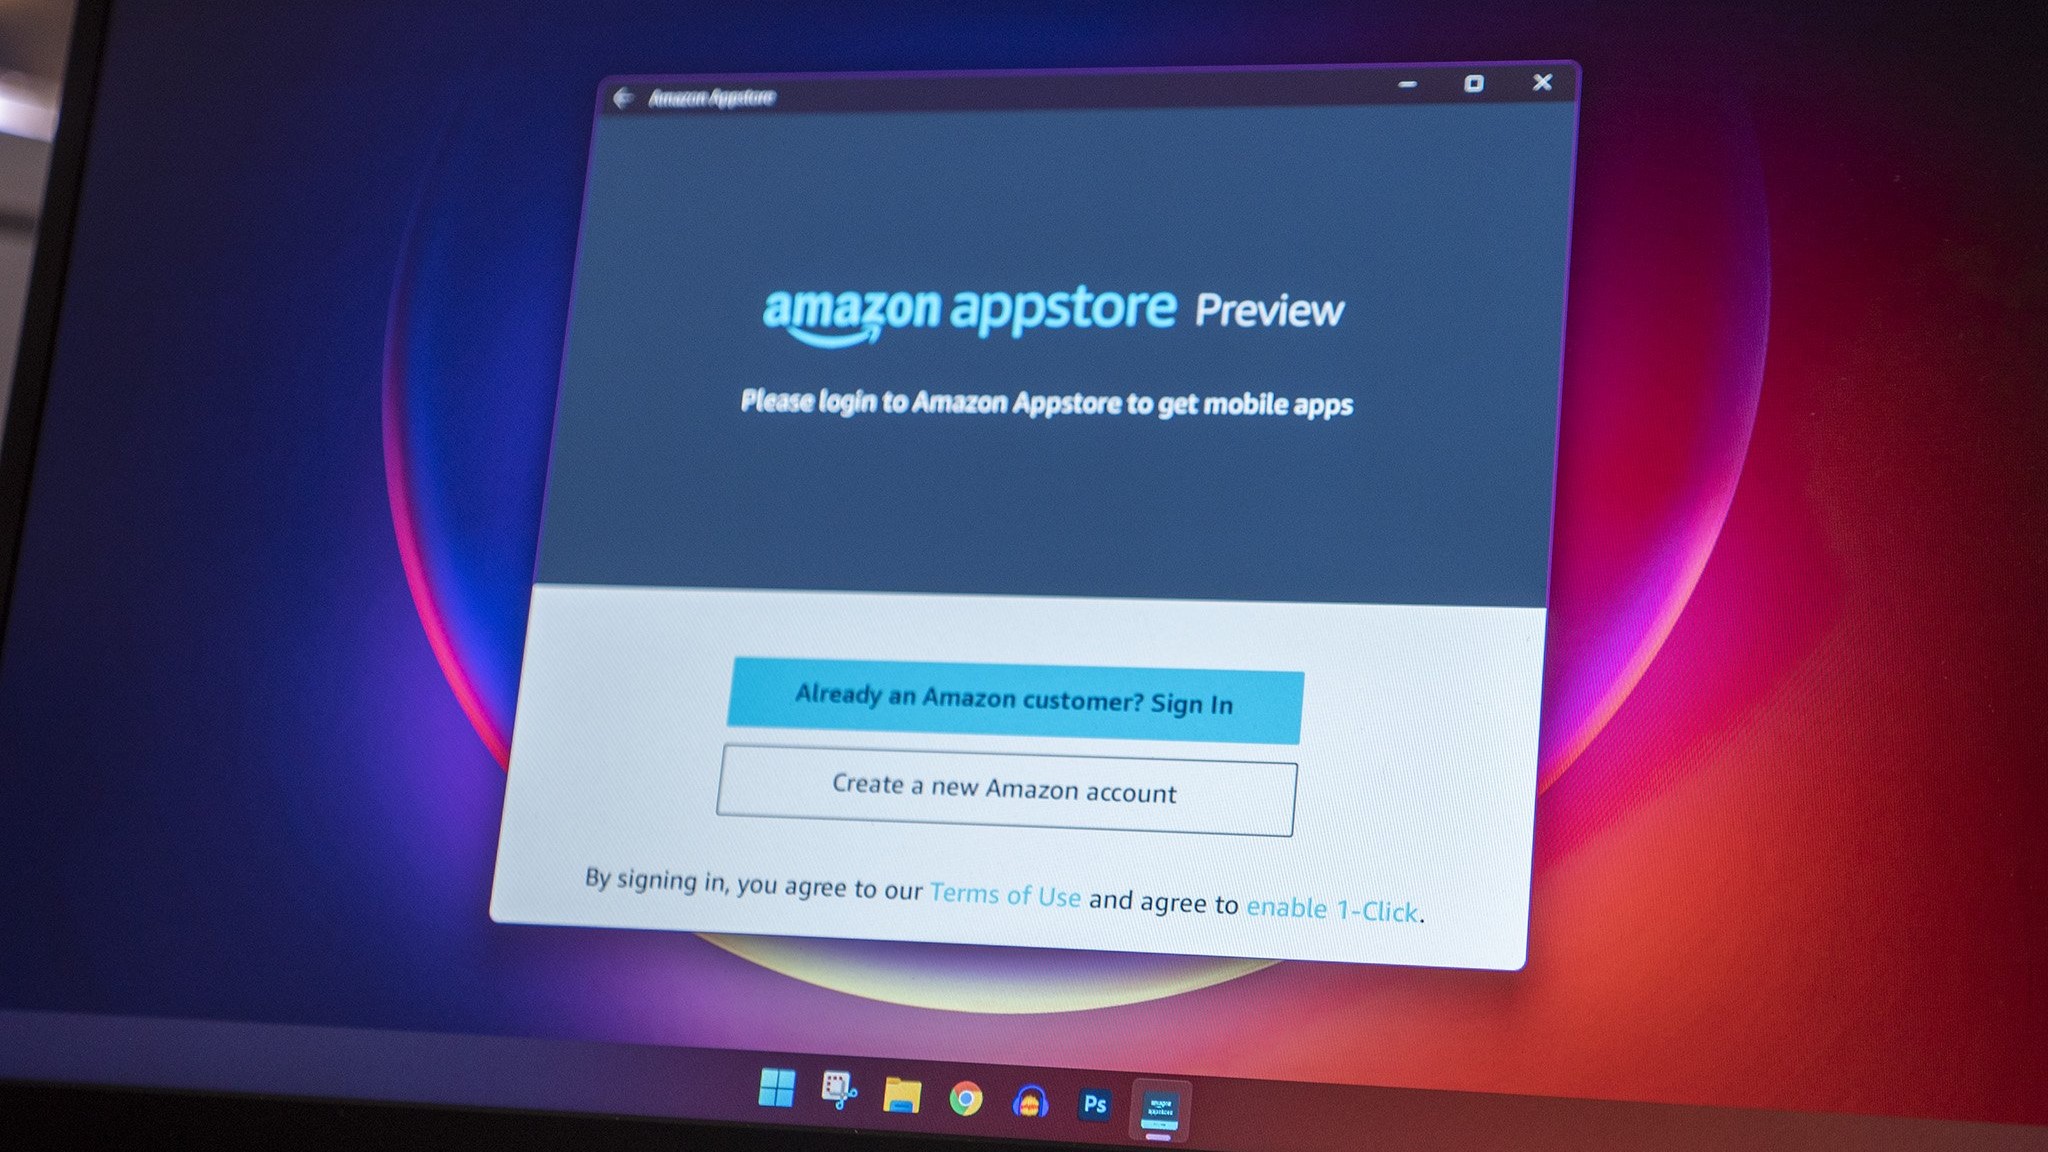 Amazon Appstore preview in Windows 11